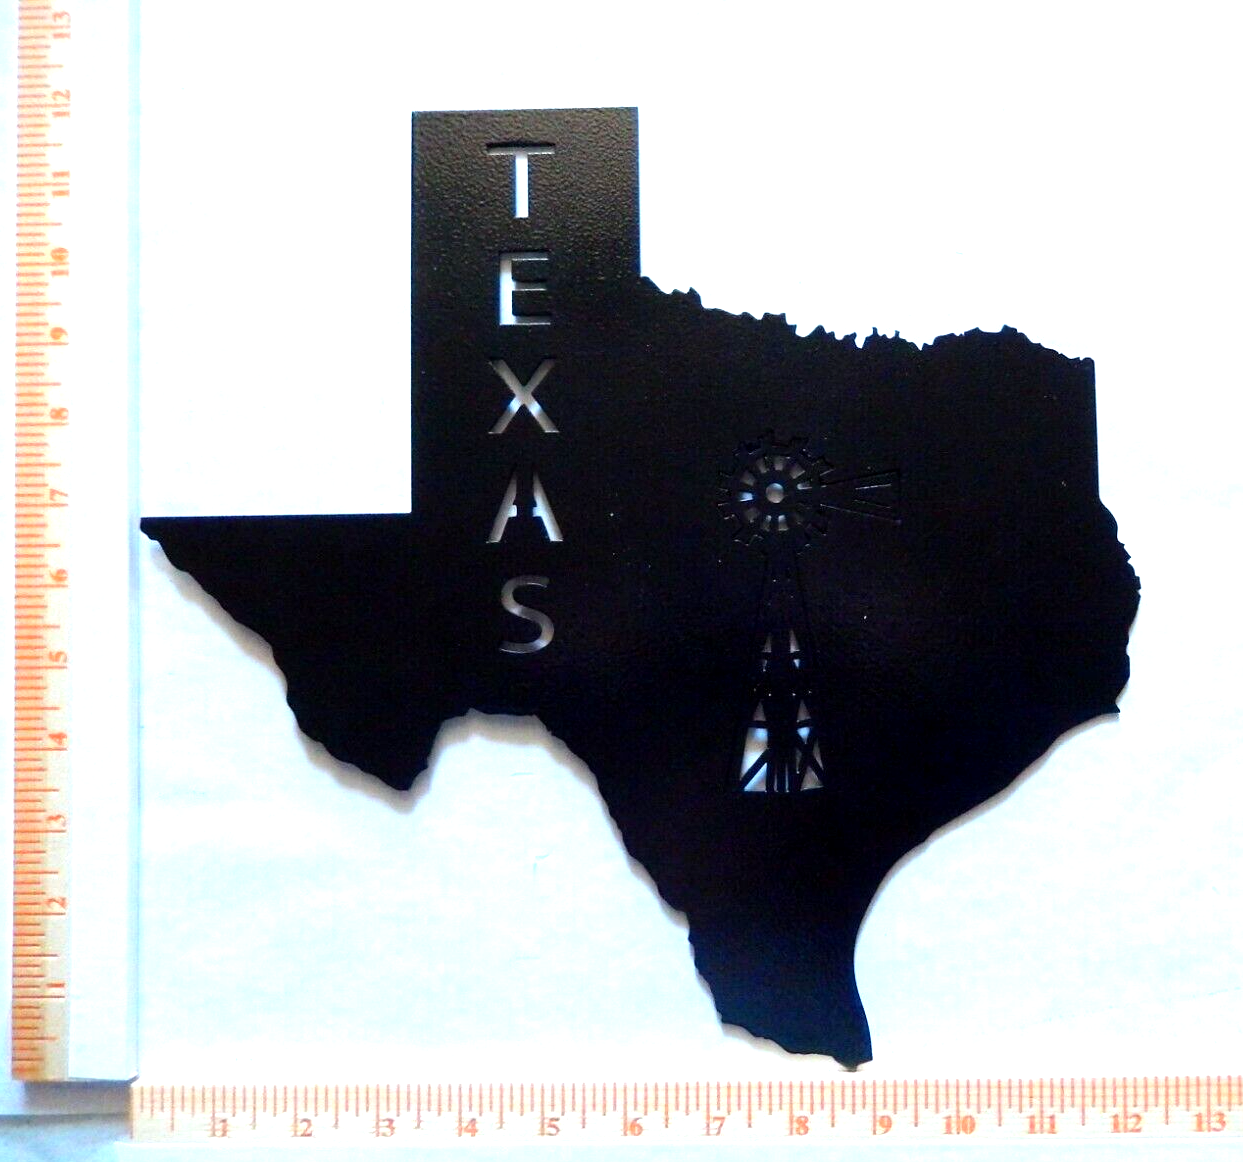 "NEW" STATE OF TEXAS WITH OIL DERRICK" METAL WALL ART 14ga. 12"x12"